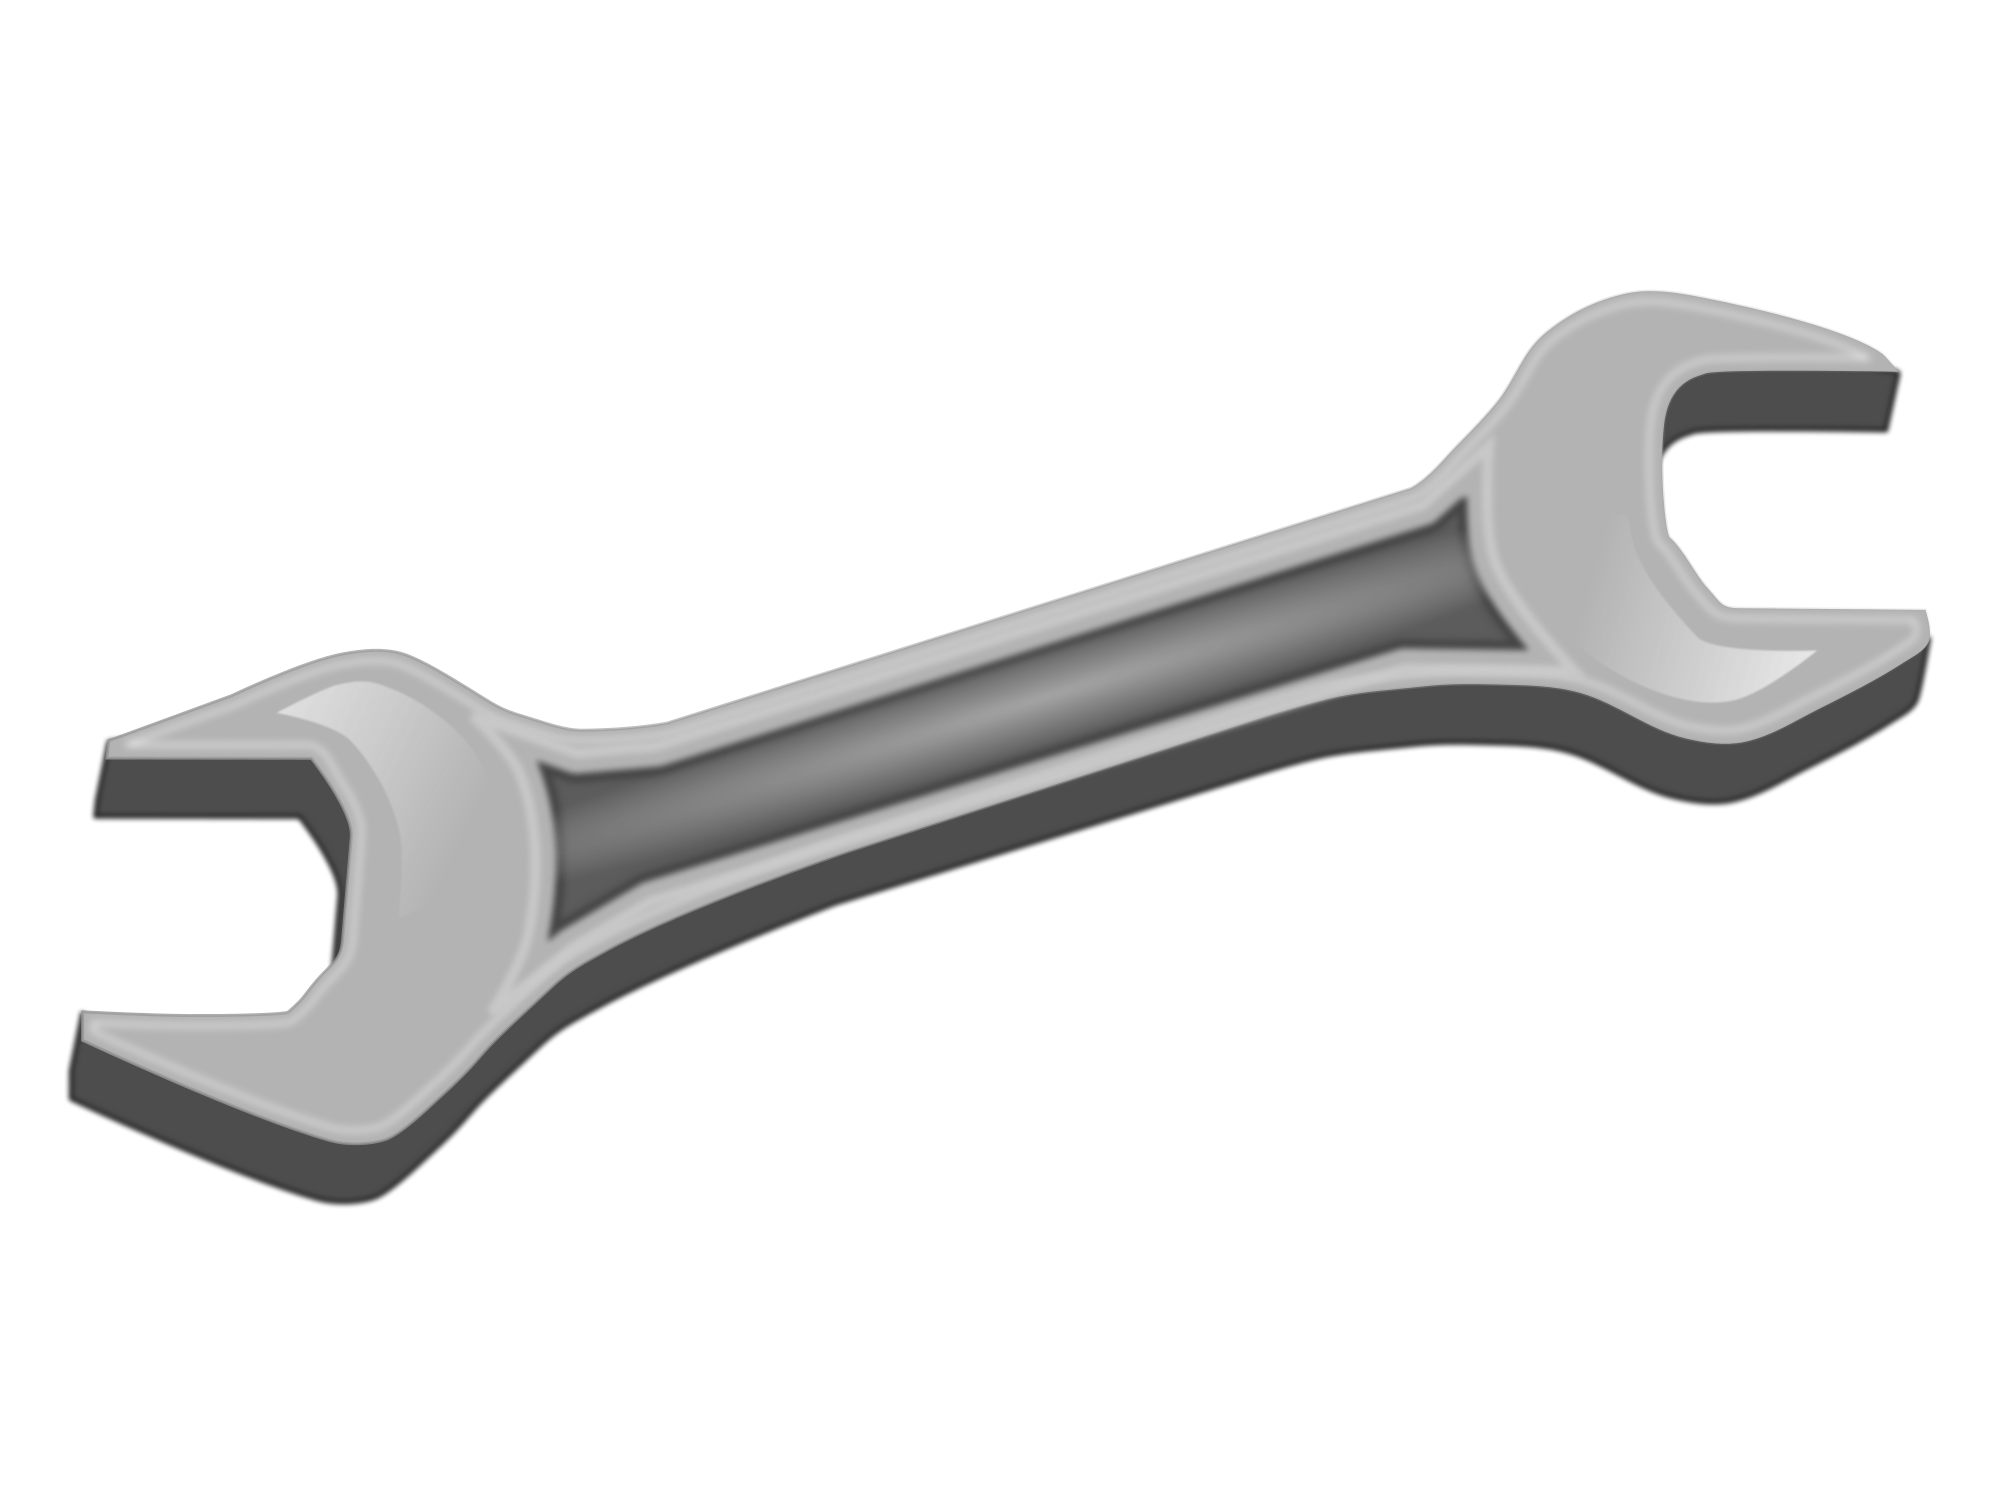 Image Wrench Spanner Png Image Free Wrench Spanner Png Image